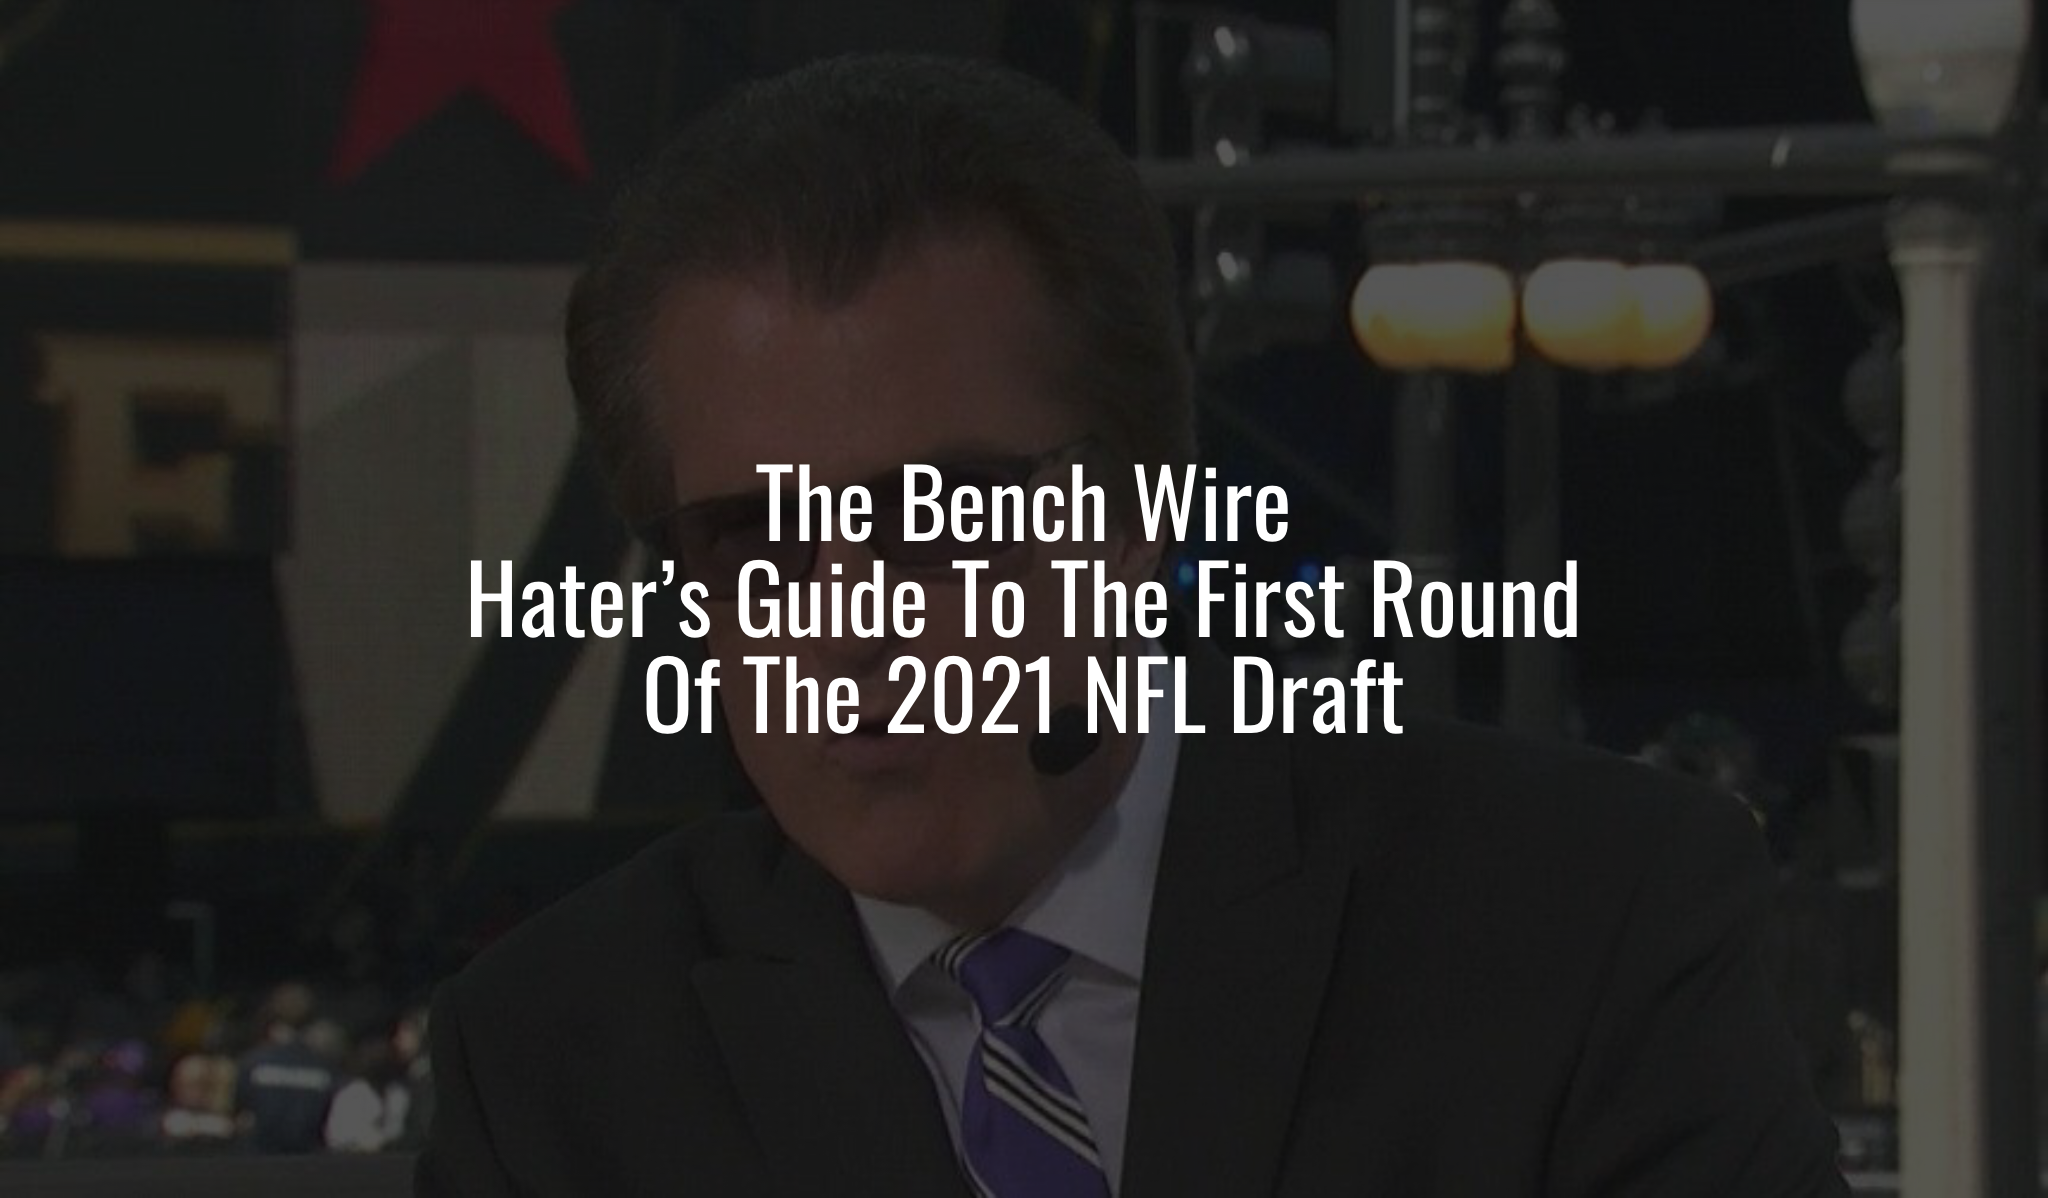 the bench wire haters guide to the 2021 nfl draft first round